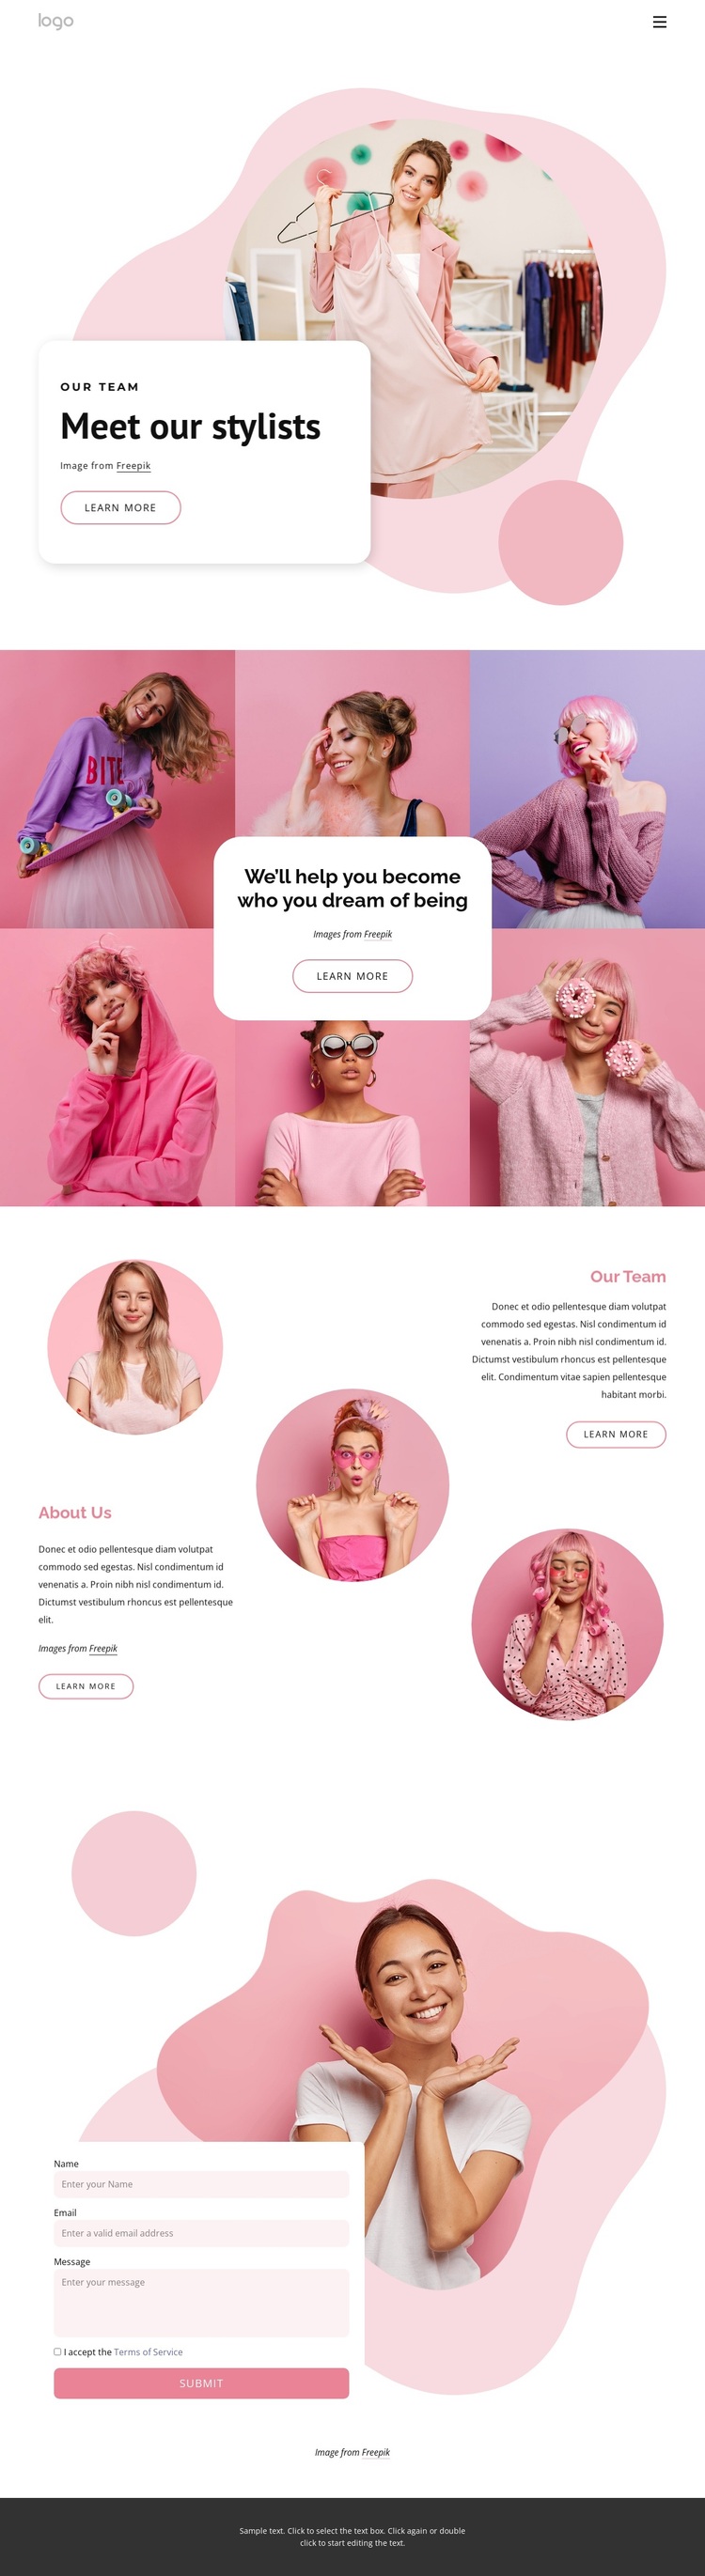 Meet our stylists Joomla Page Builder